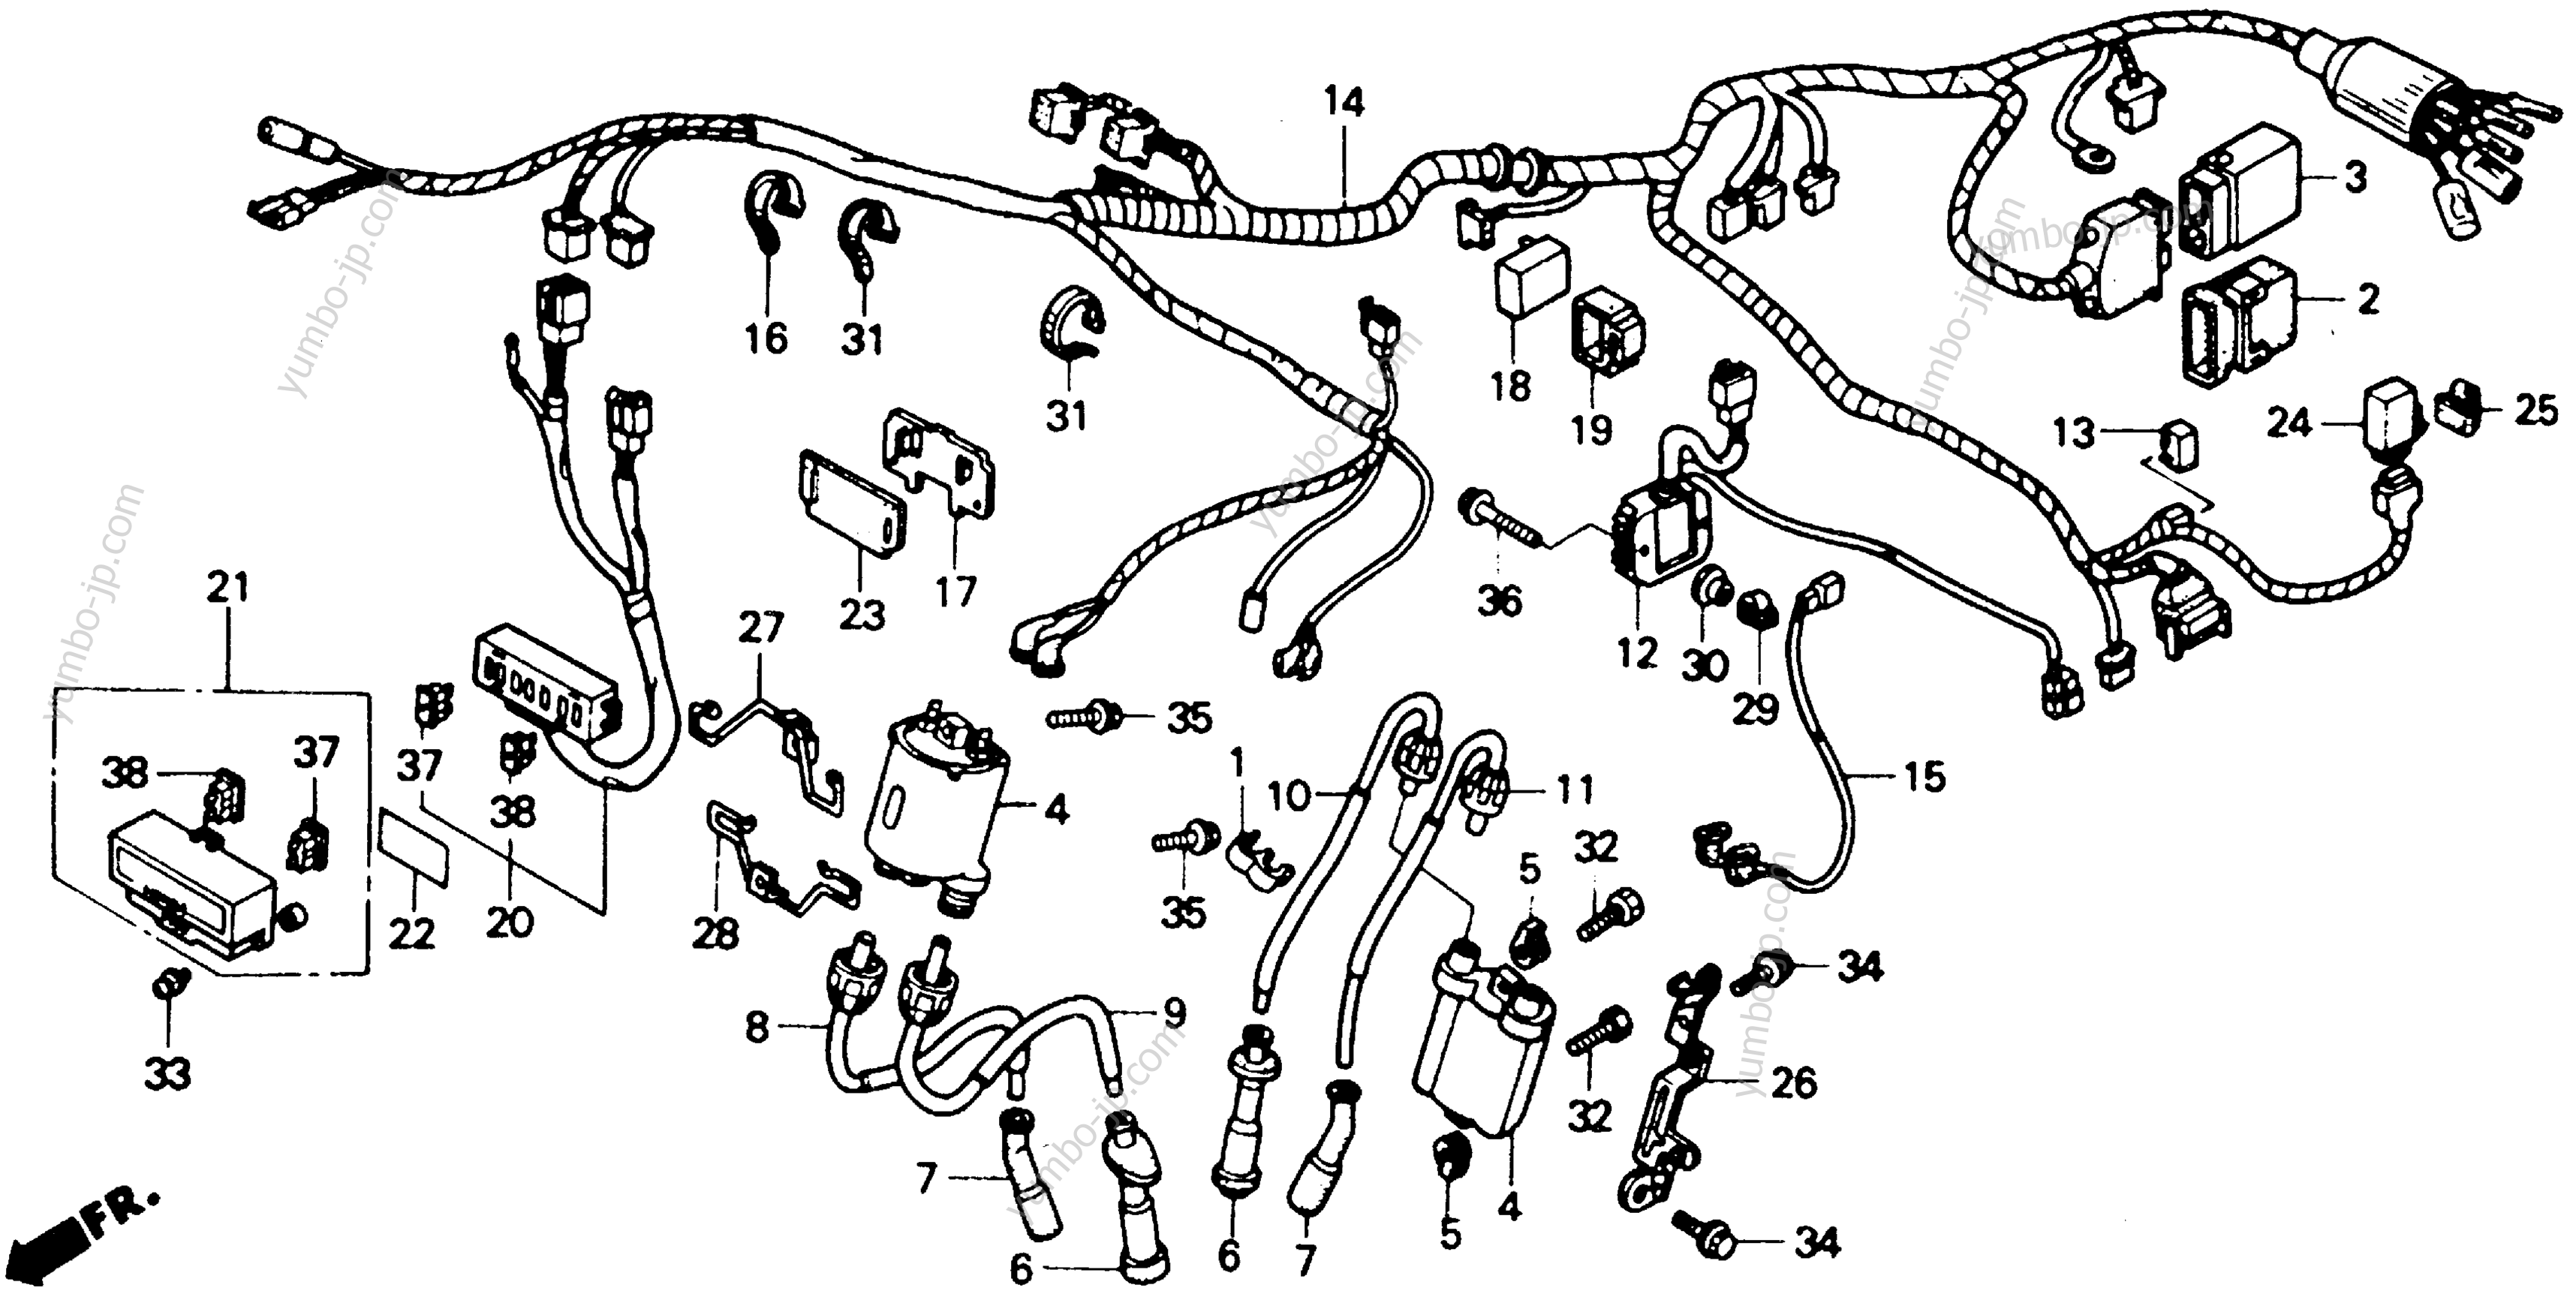 WIRE HARNESS for motorcycles HONDA NT650 A 1990 year